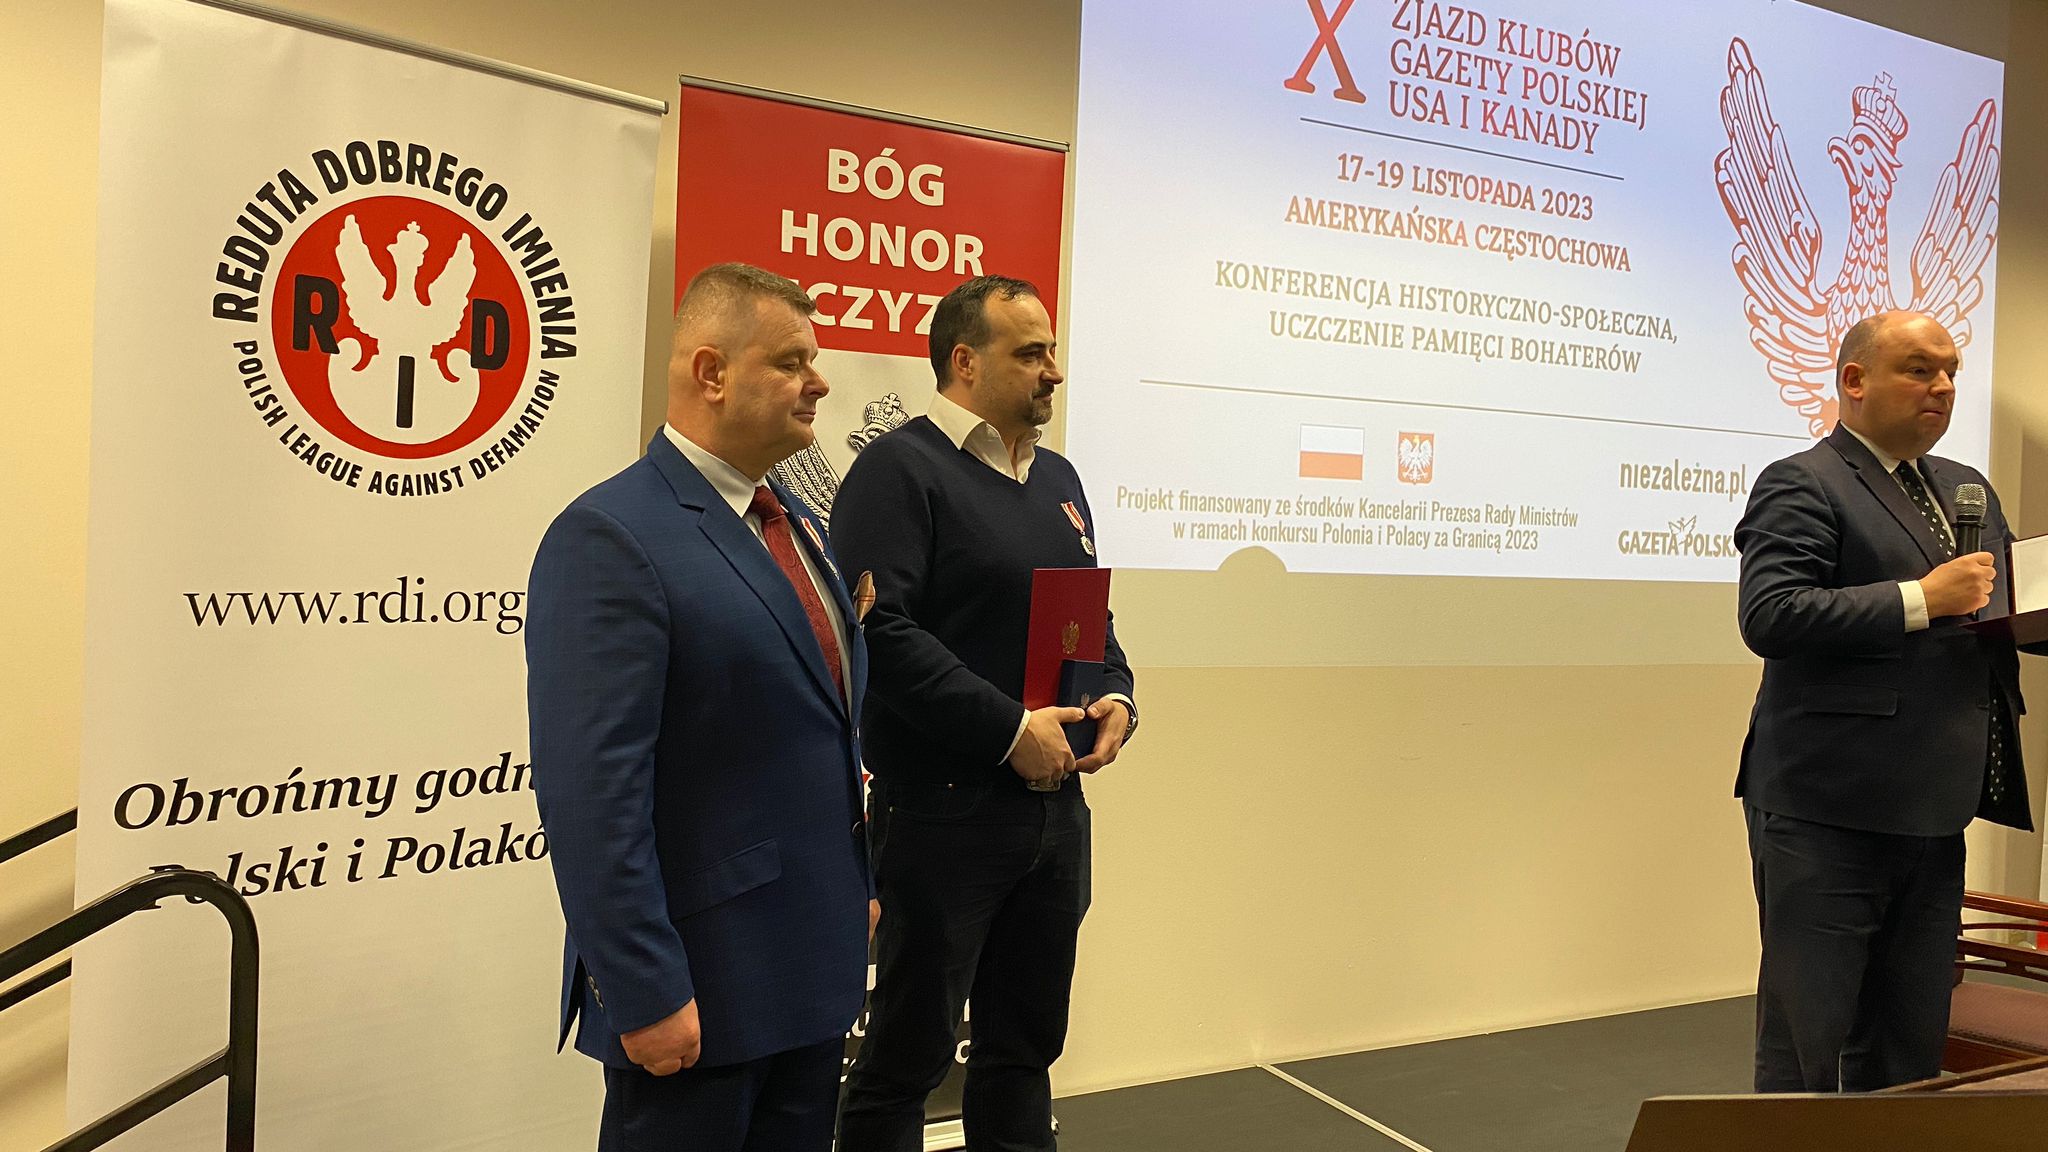 In a heartfelt acknowledgment of their contributions to the Polish diaspora, activists from the “Gazeta Polska” clubs in the United States have been honored by the Polish government with the Badge of Merit for Polonia and Poles Abroad. The recipients of this prestigious award are Maciej Rusiński and Tadeusz Antoniak. The award ceremony took place during the 10th Congress of “Gazeta Polska” Clubs in the USA and Canada.